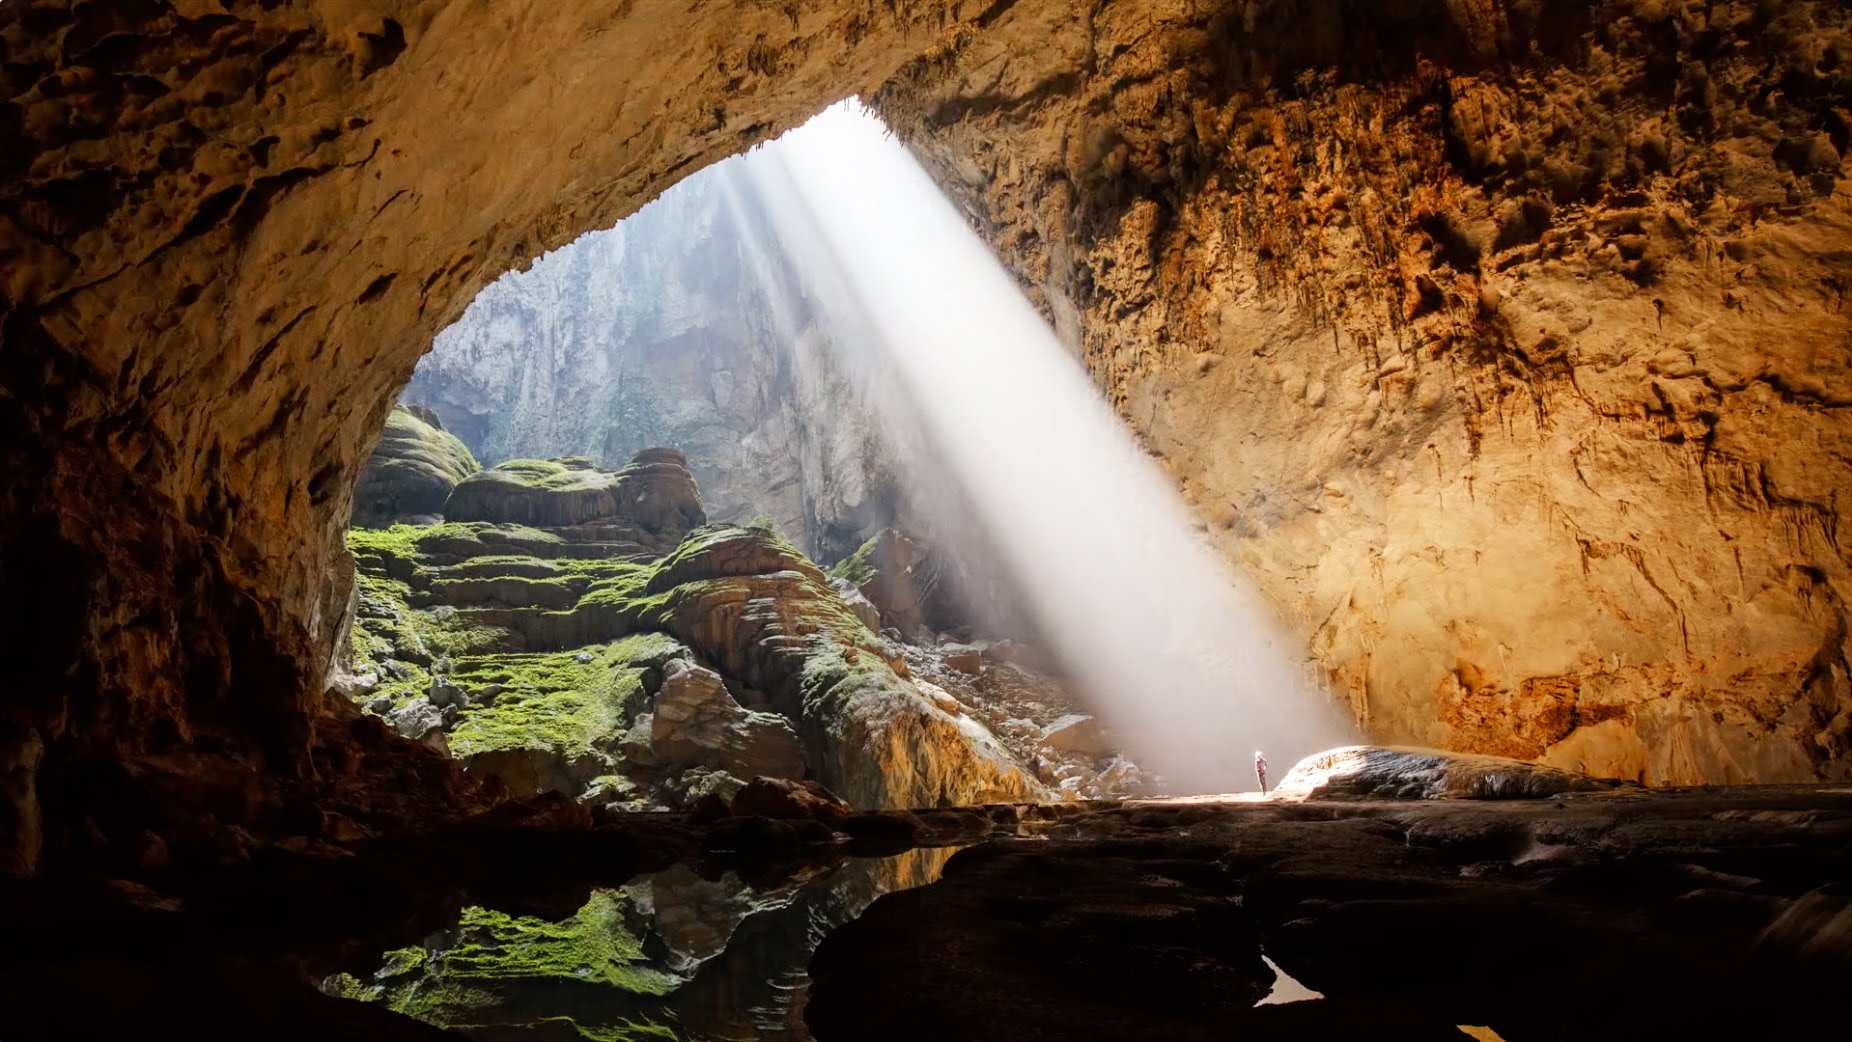 Quang Binh tourism organizes an online knowledge contest about Son Doong Cave